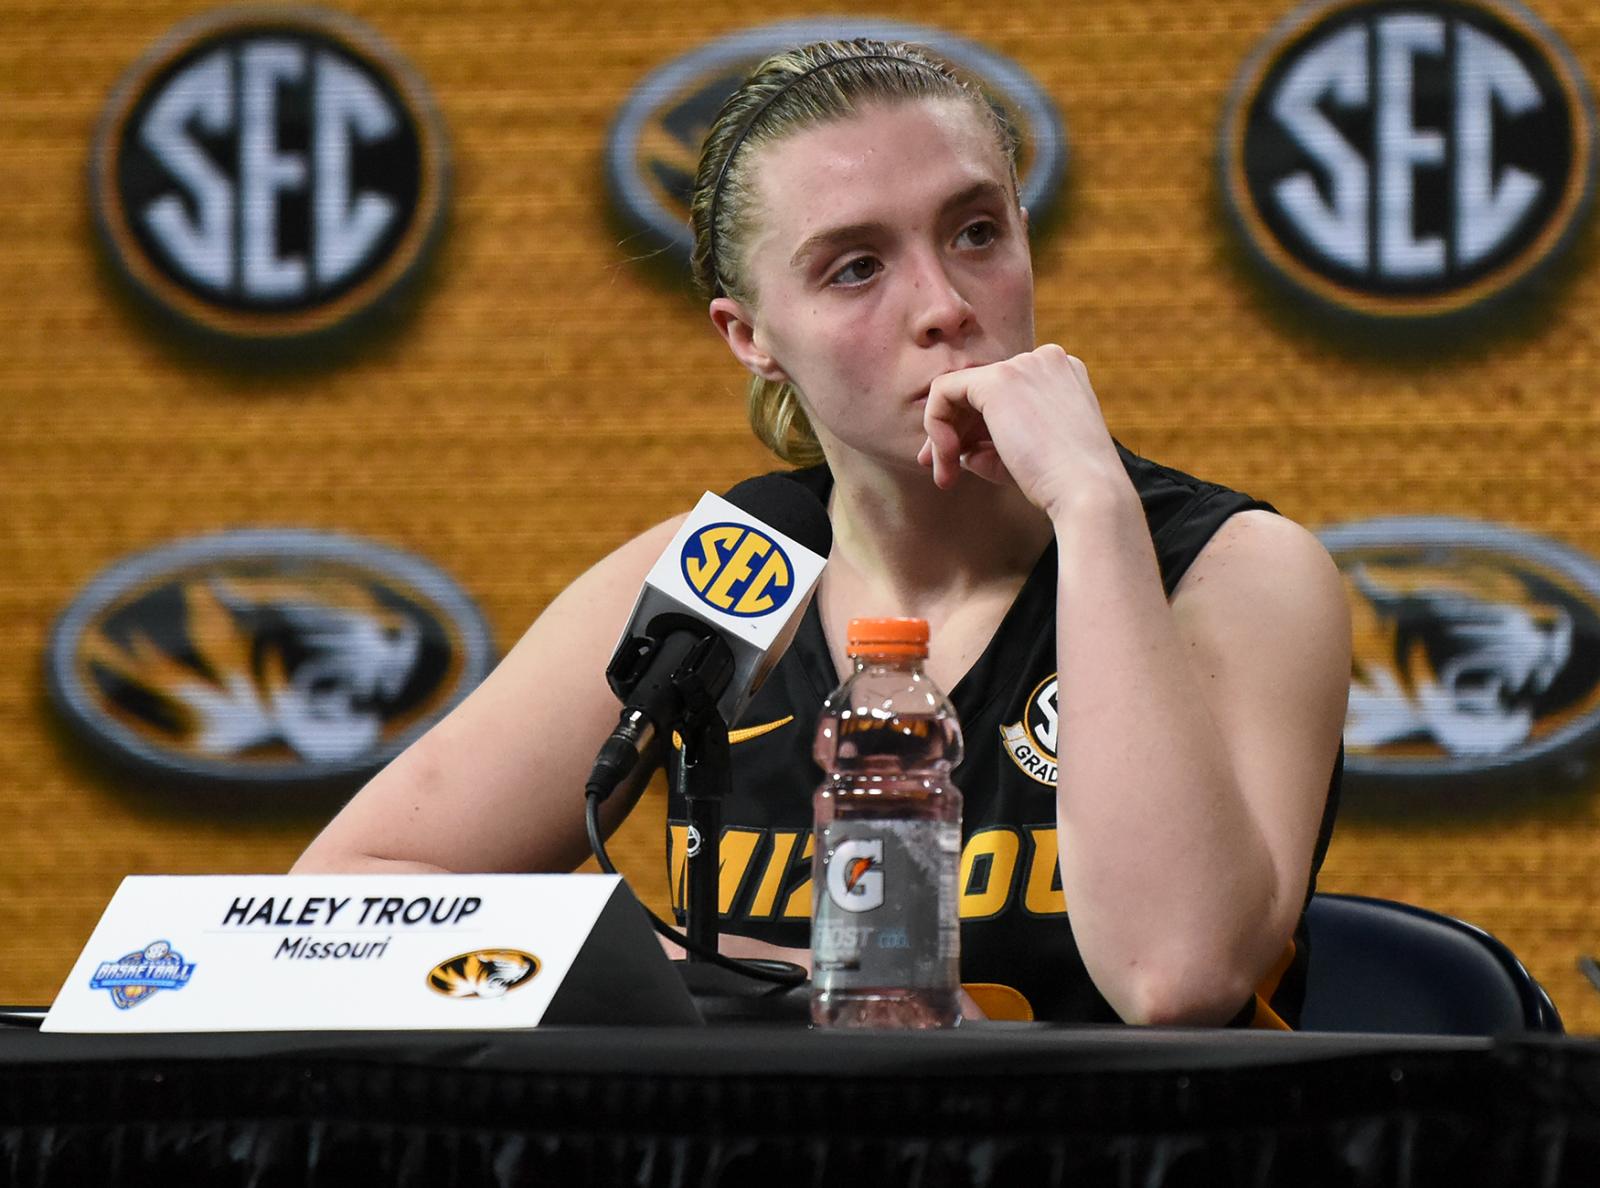 Haley Troup looks to the side on Thursday, March 3, 2022 at Bridgestone Arena in Nashville. &ldquo;We were so prepared that it allowed me to come into the game and play free,&rdquo; Troup said. &ldquo;Night in and night out, it&rsquo;s whatever I can do to help the team win, and tonight I just felt like I needed to be aggressive.&rdquo;